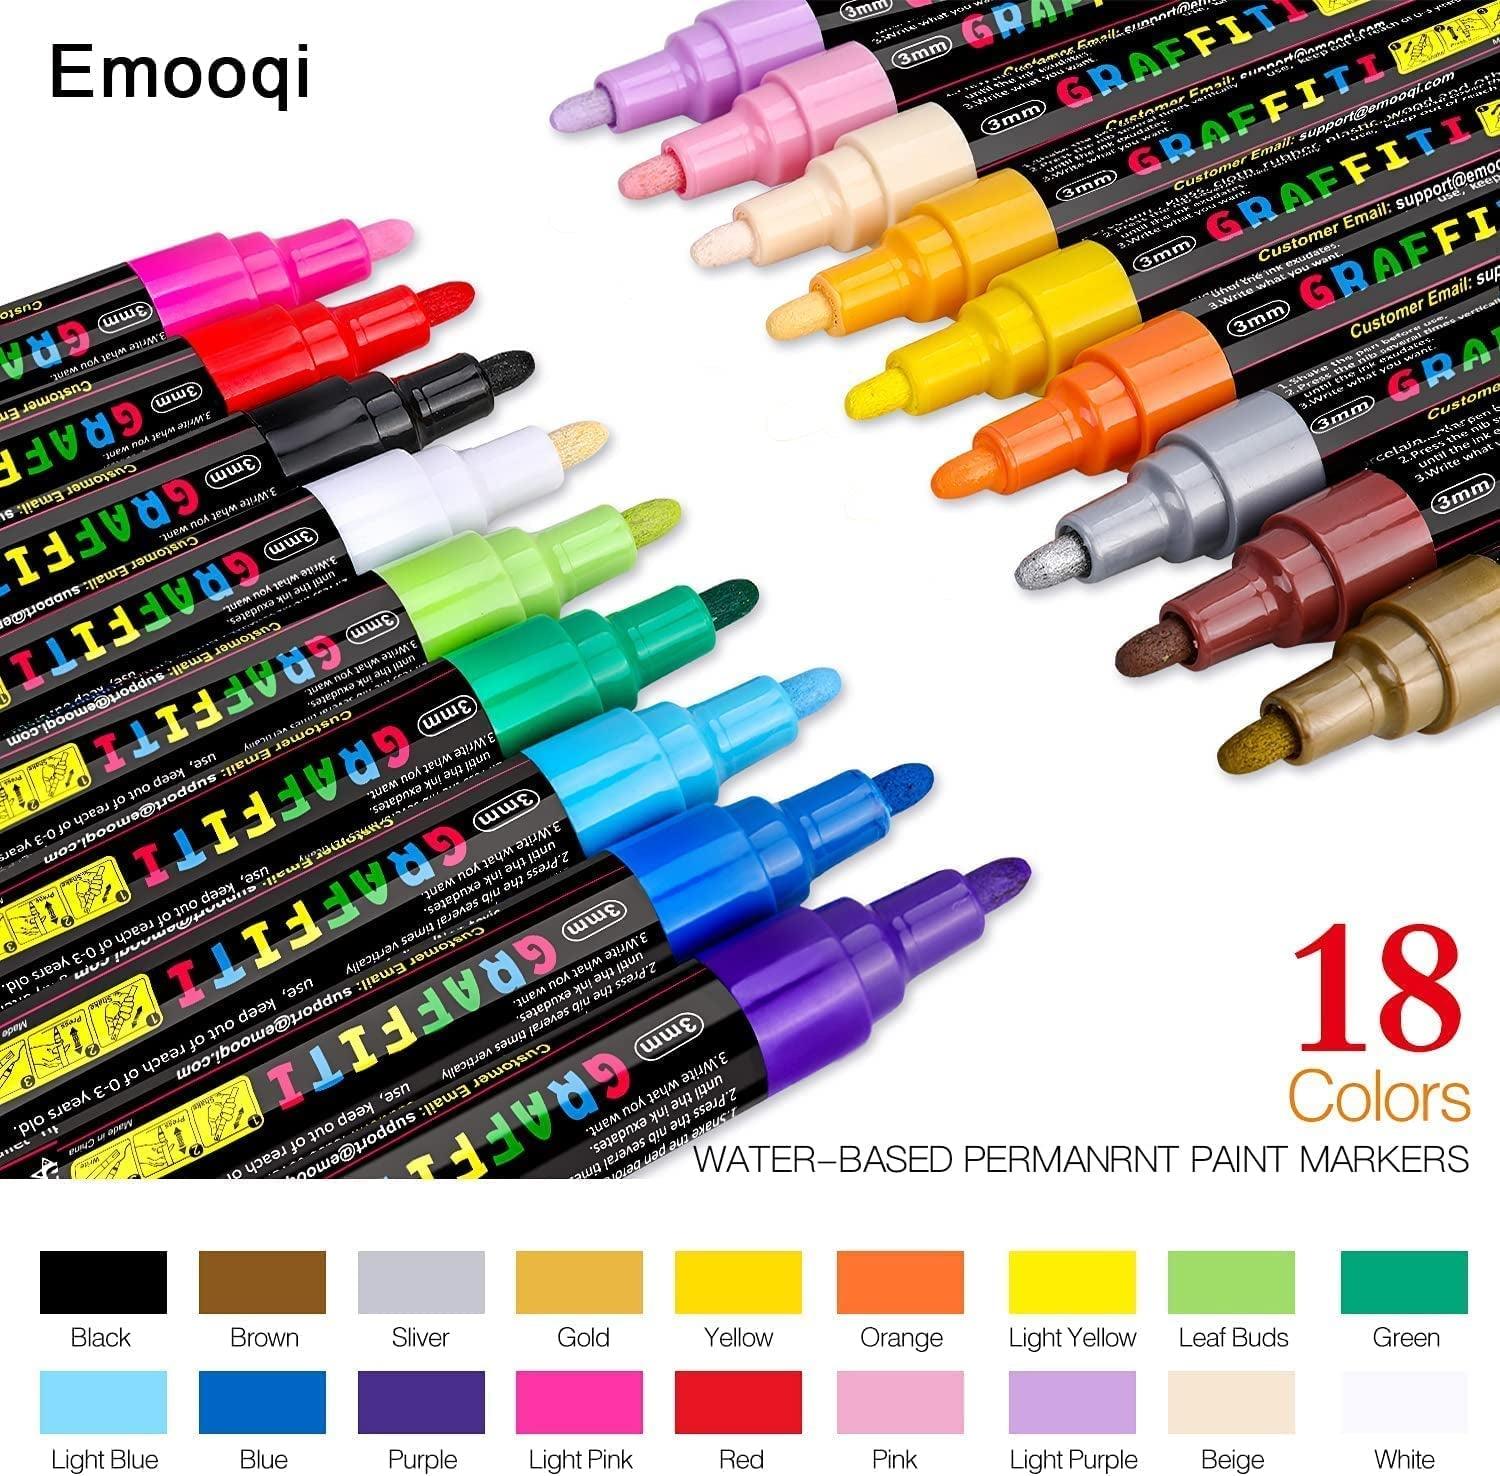 Acrylic Paint Pens, 18 Colors Paint Markers Paint Pens Paint Makers for Rocks Craft Ceramic Glass Wood Fabric Canvas - WoodArtSupply